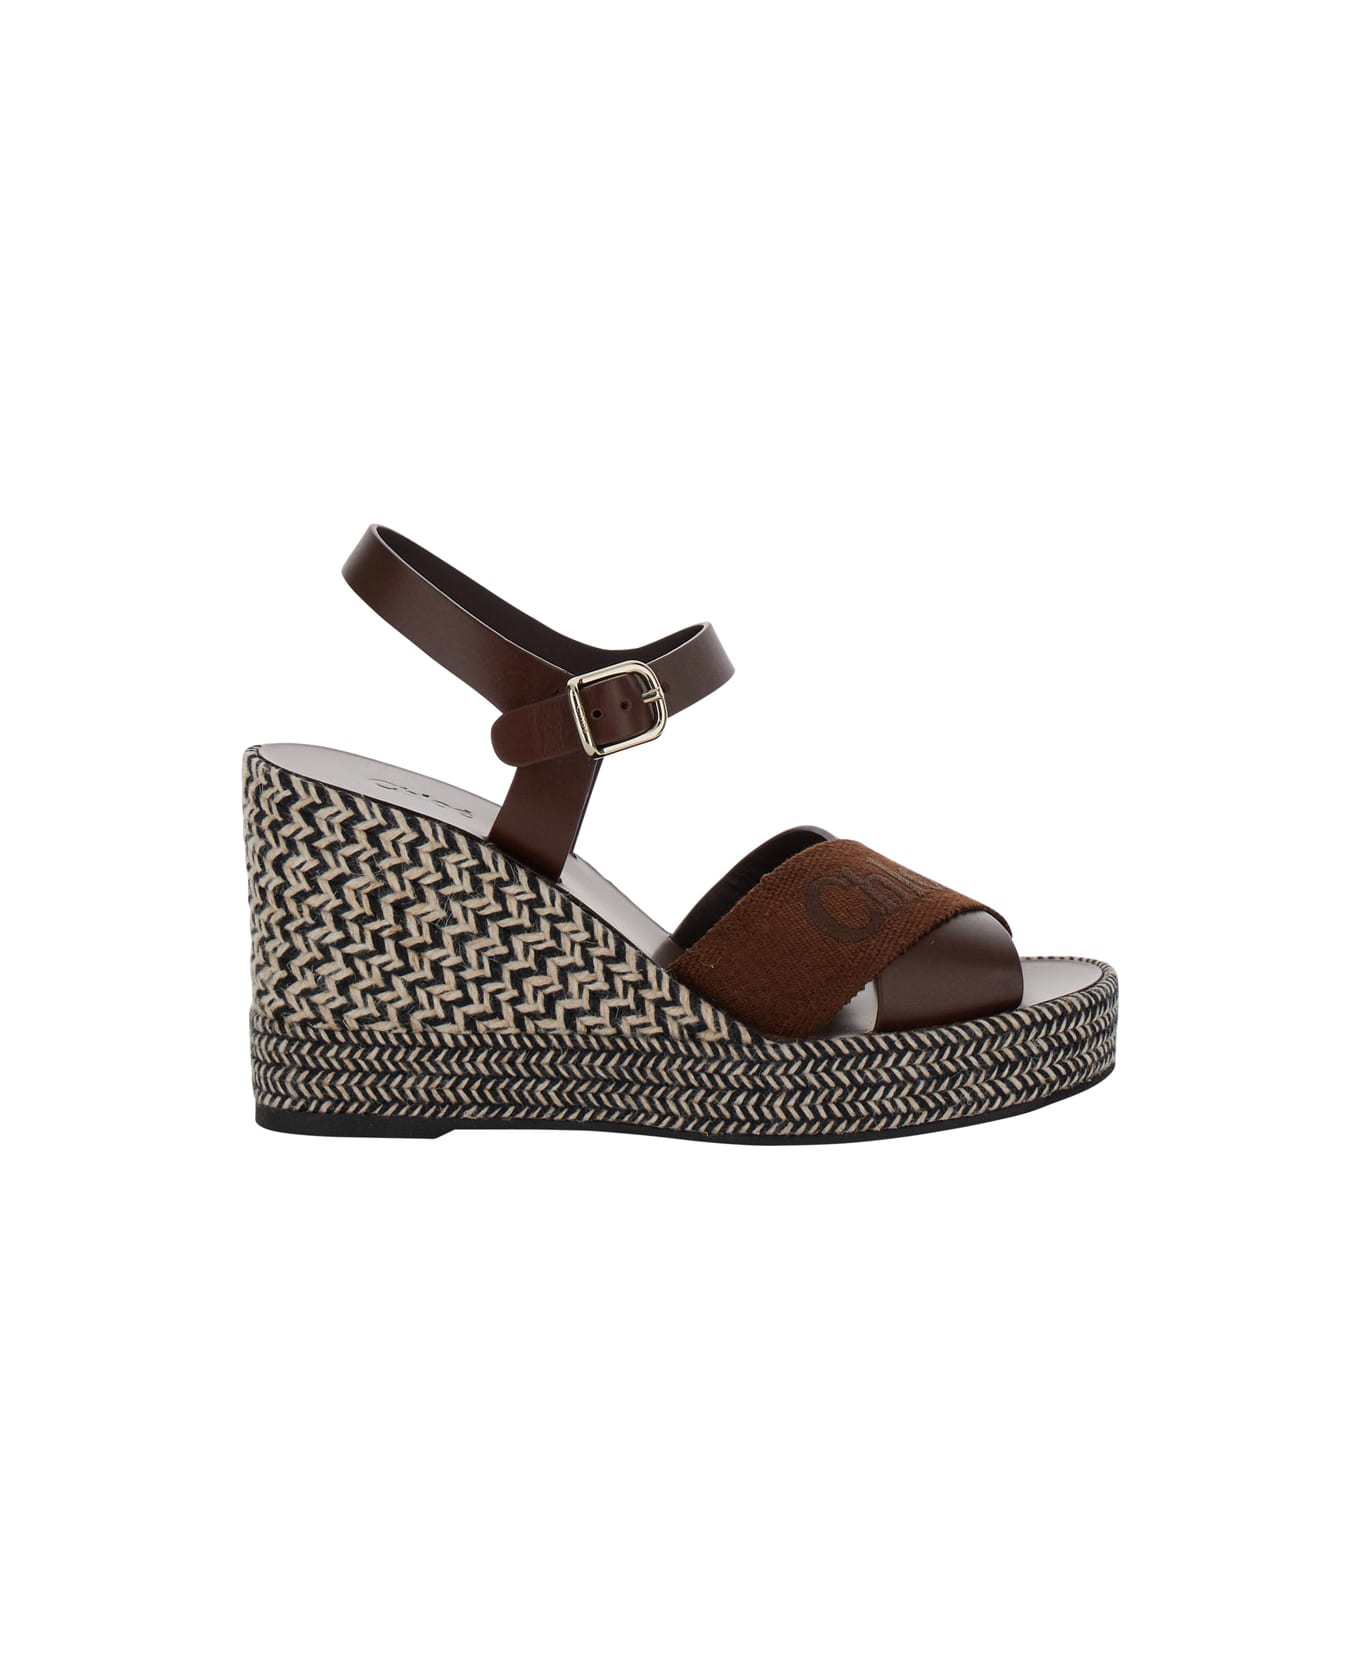 Chloé 'piia' Brown Espadrillas Sandals With Wedge In Leather And Jute Woman - Brown